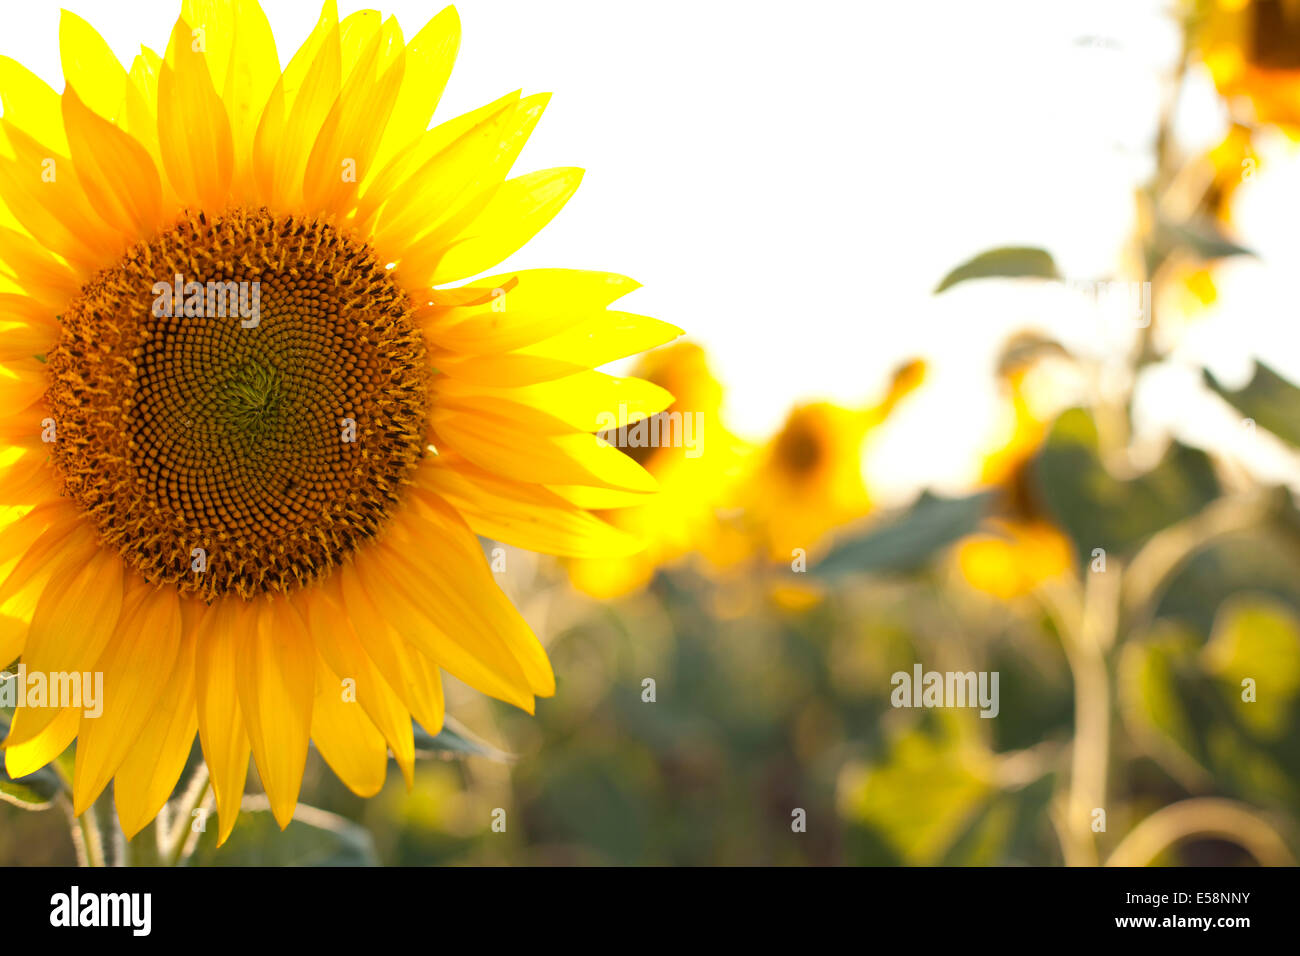 Yellow sunflowers backlit at sunset in a field Stock Photo